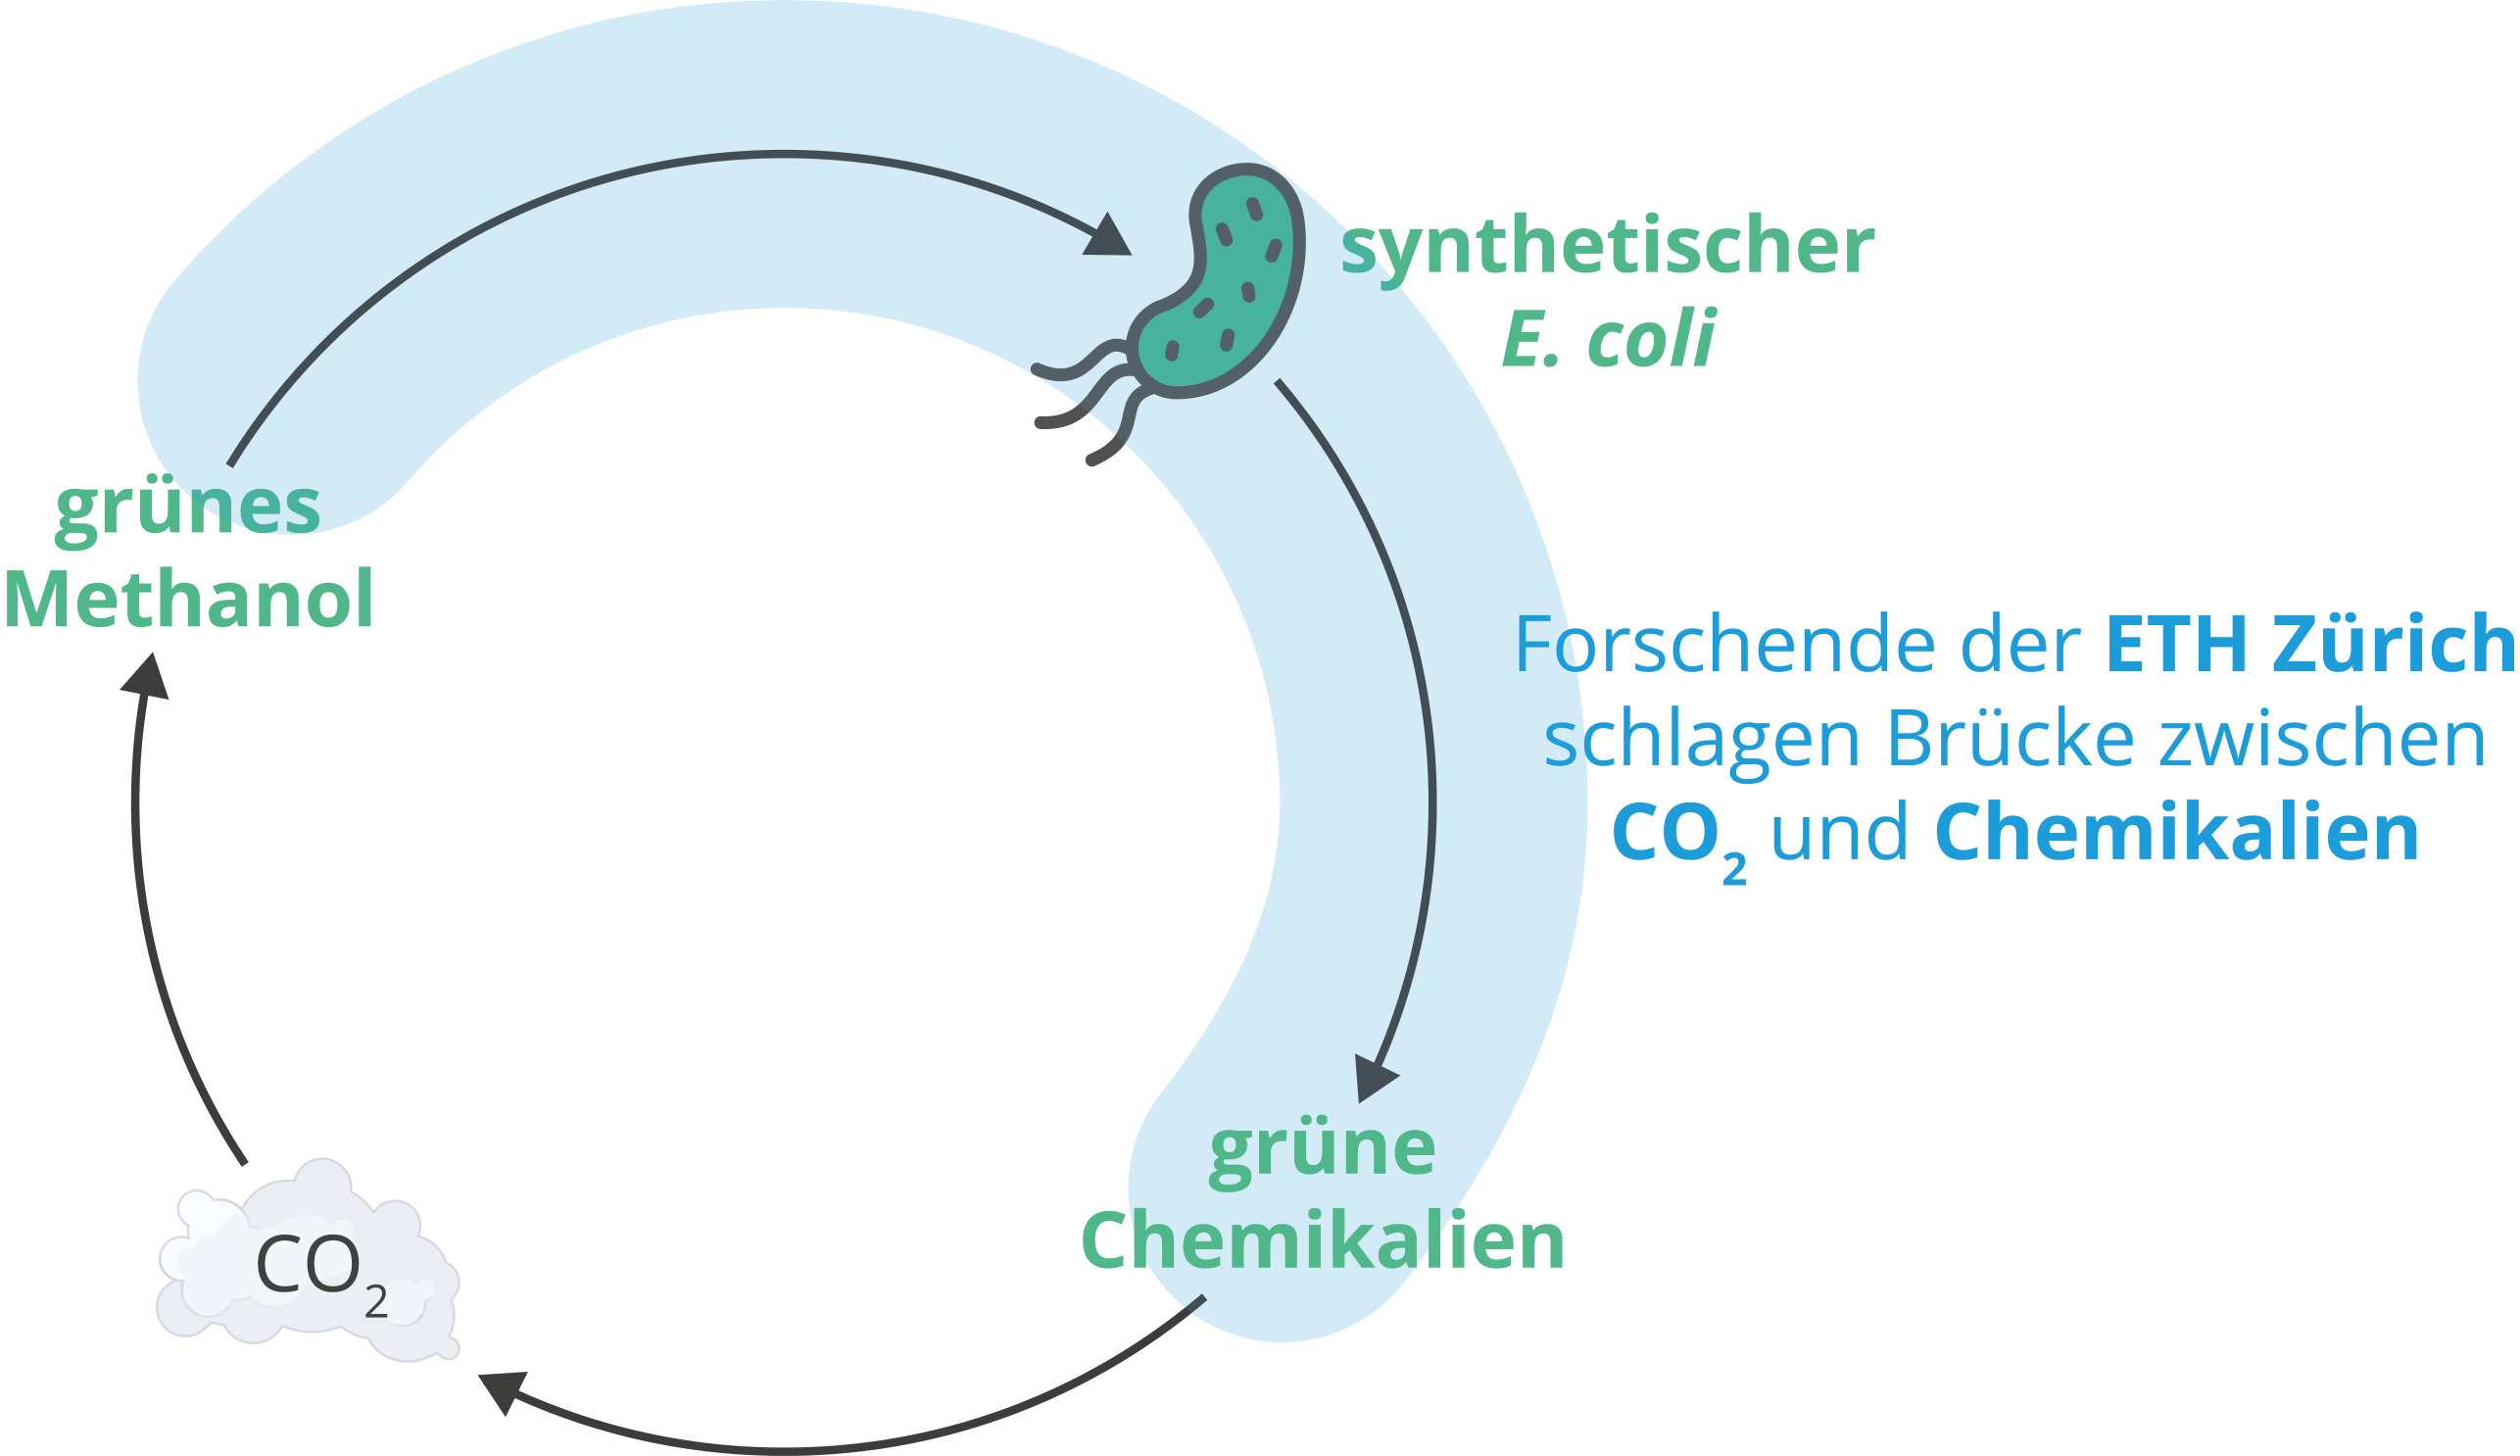 Cycle which describes the bridge between CO2 and chemicals.